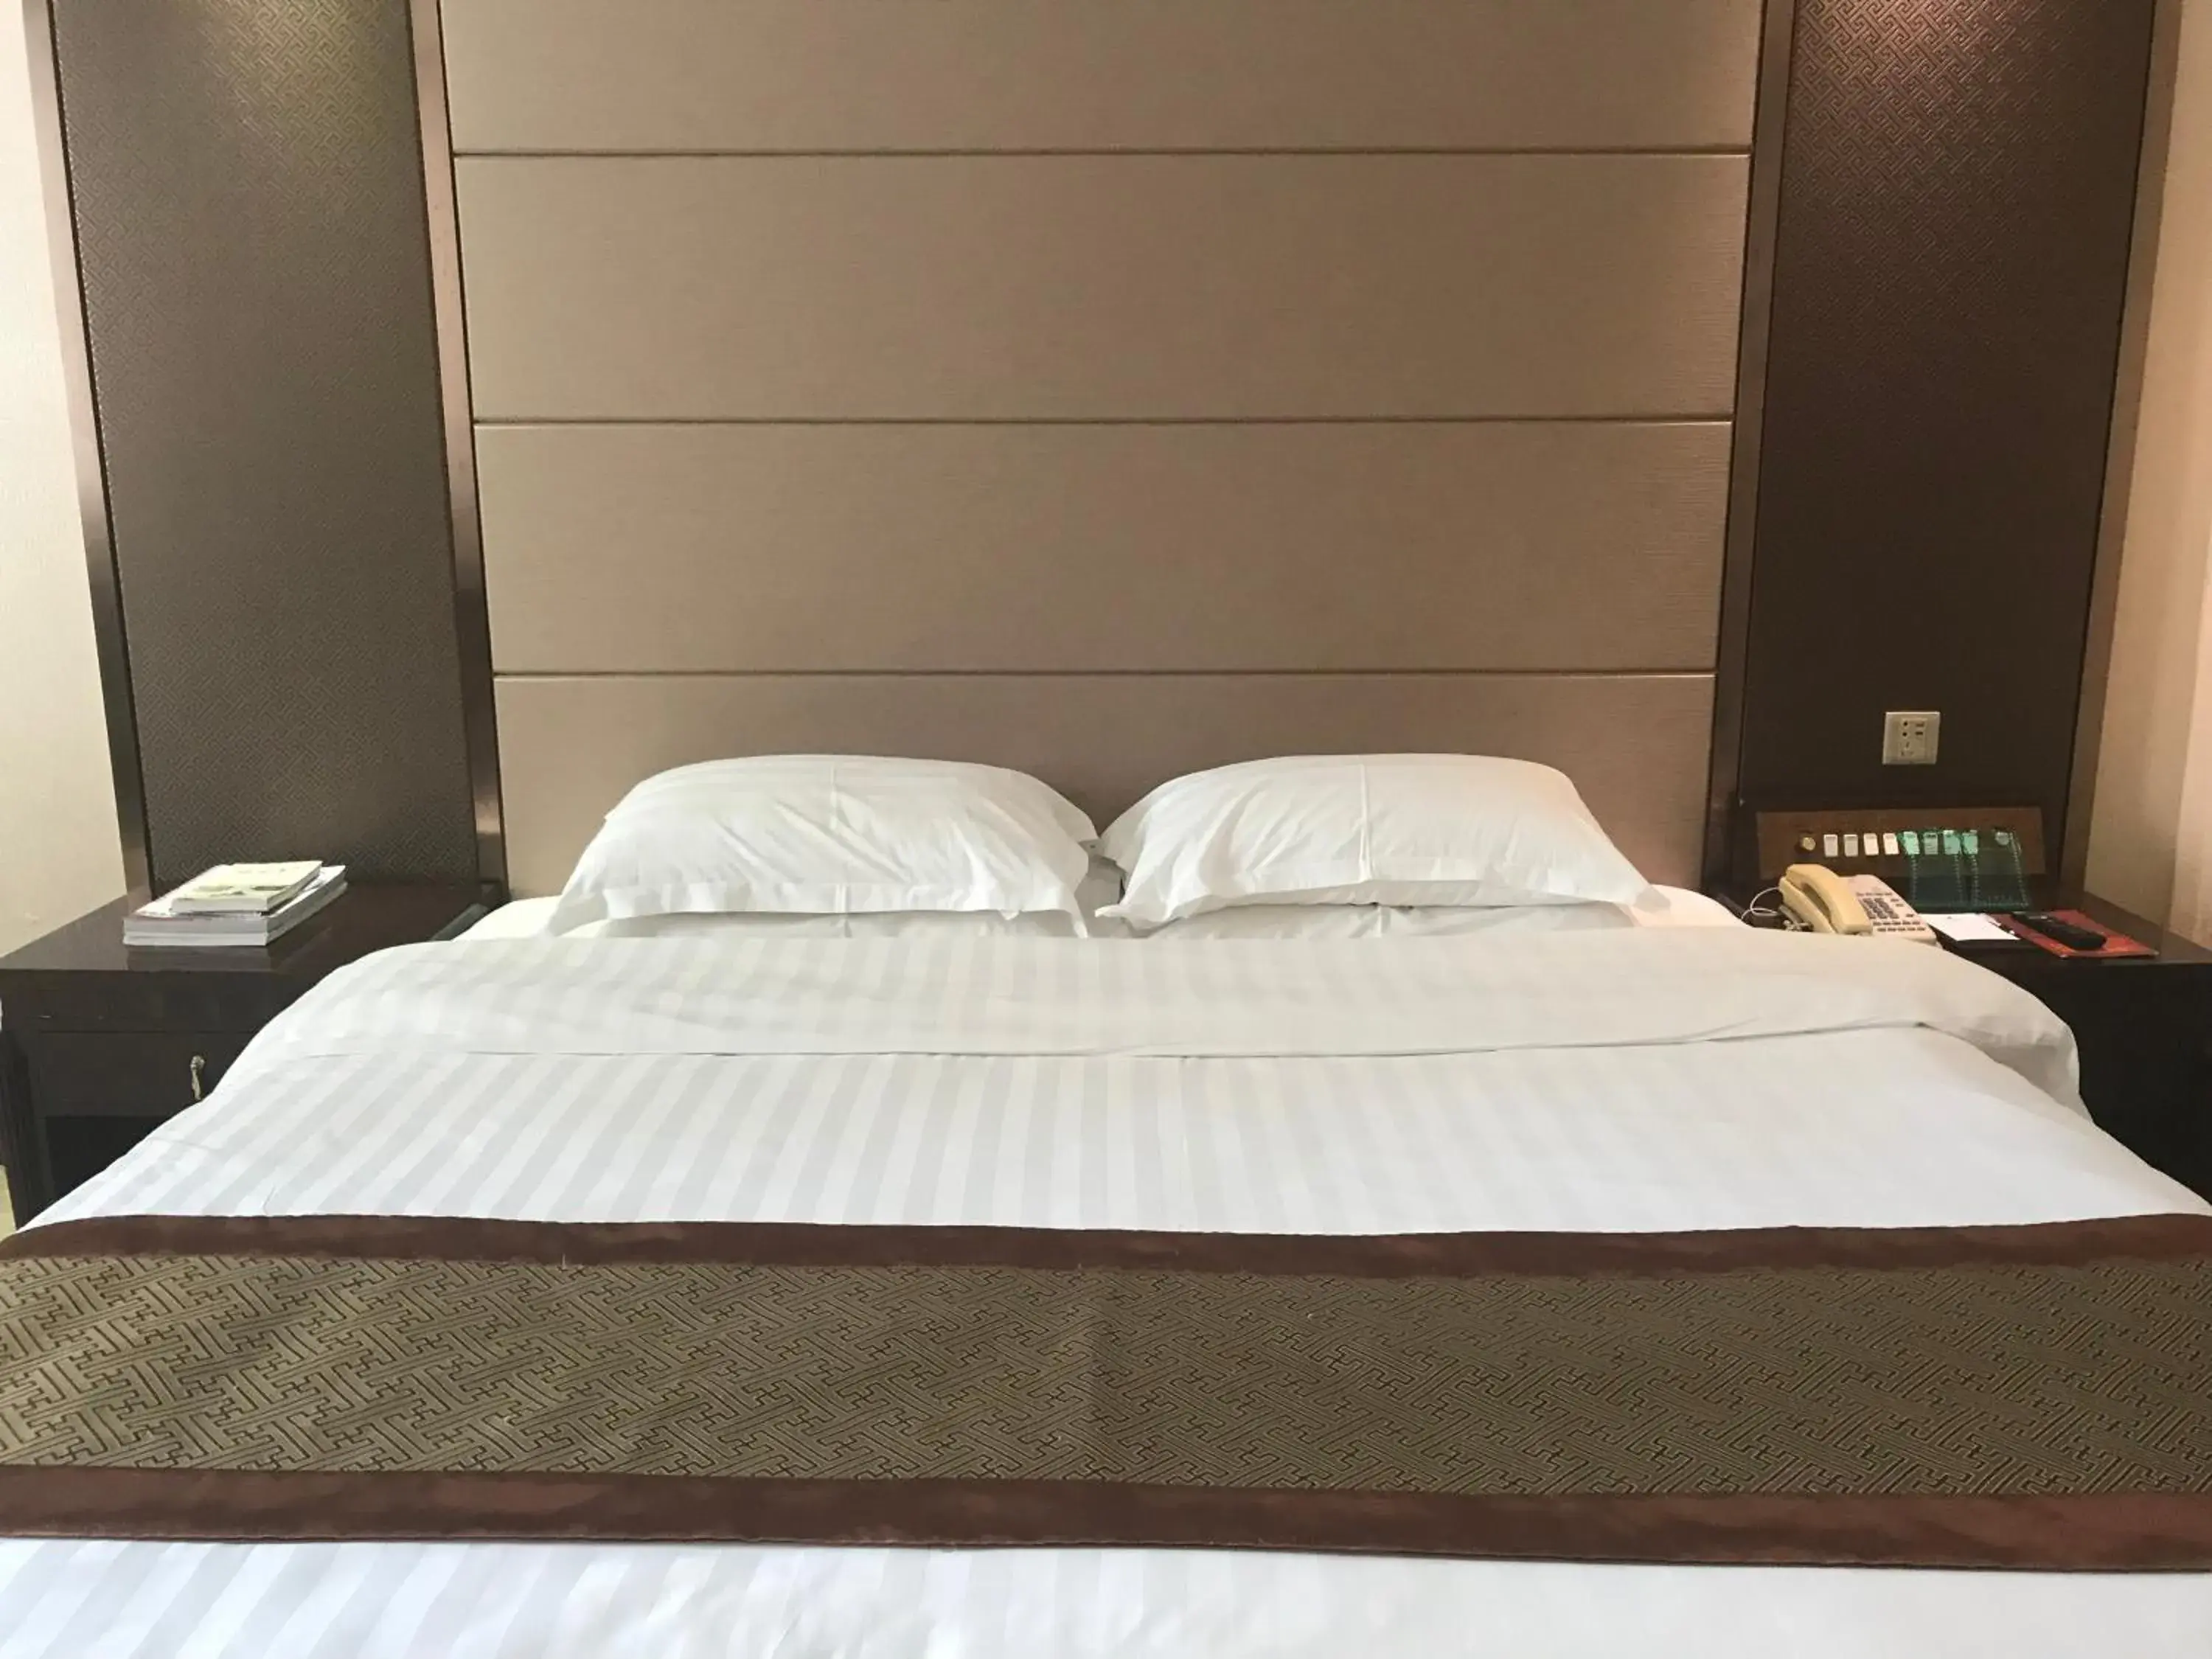 Bed in Chaozhou Hotel